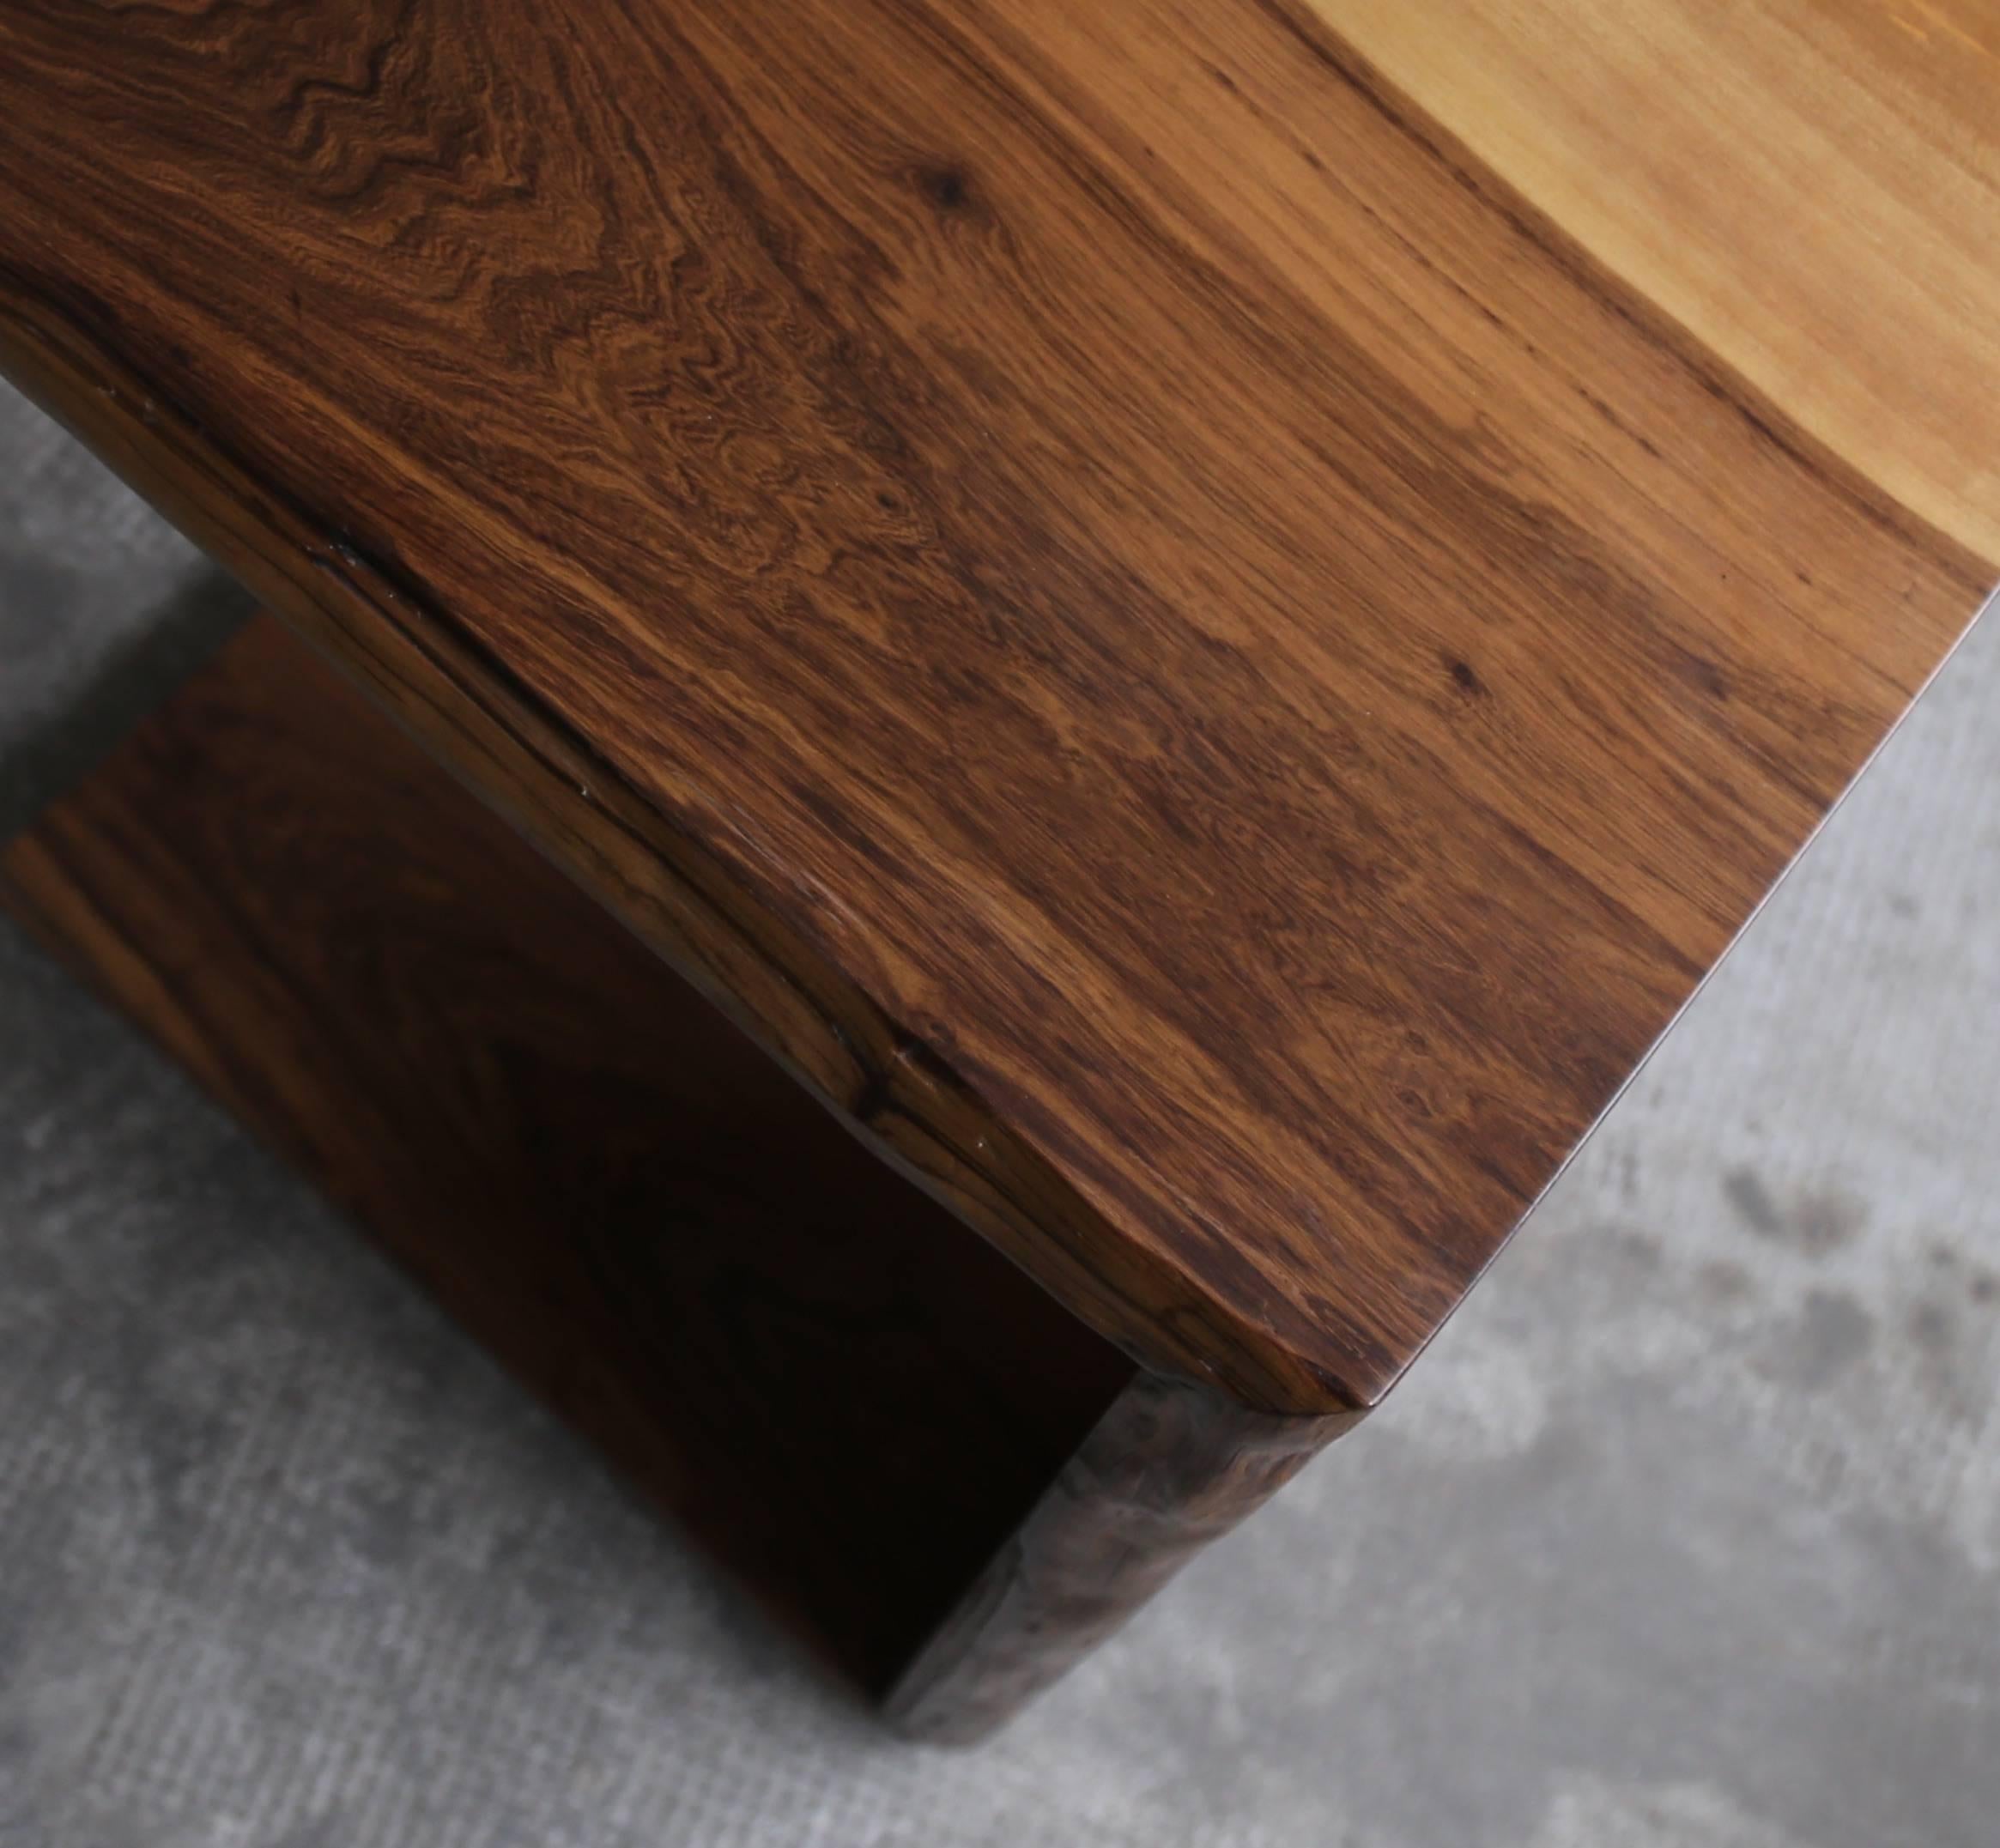 The Carlo Table is a cantilevered occasional table, designed to slide under a sofa or sitting area as necessary, and fashioned from slabs of Argentine Rosewood. Shown here in a natural finish, it is customizable to your desired dimensions.